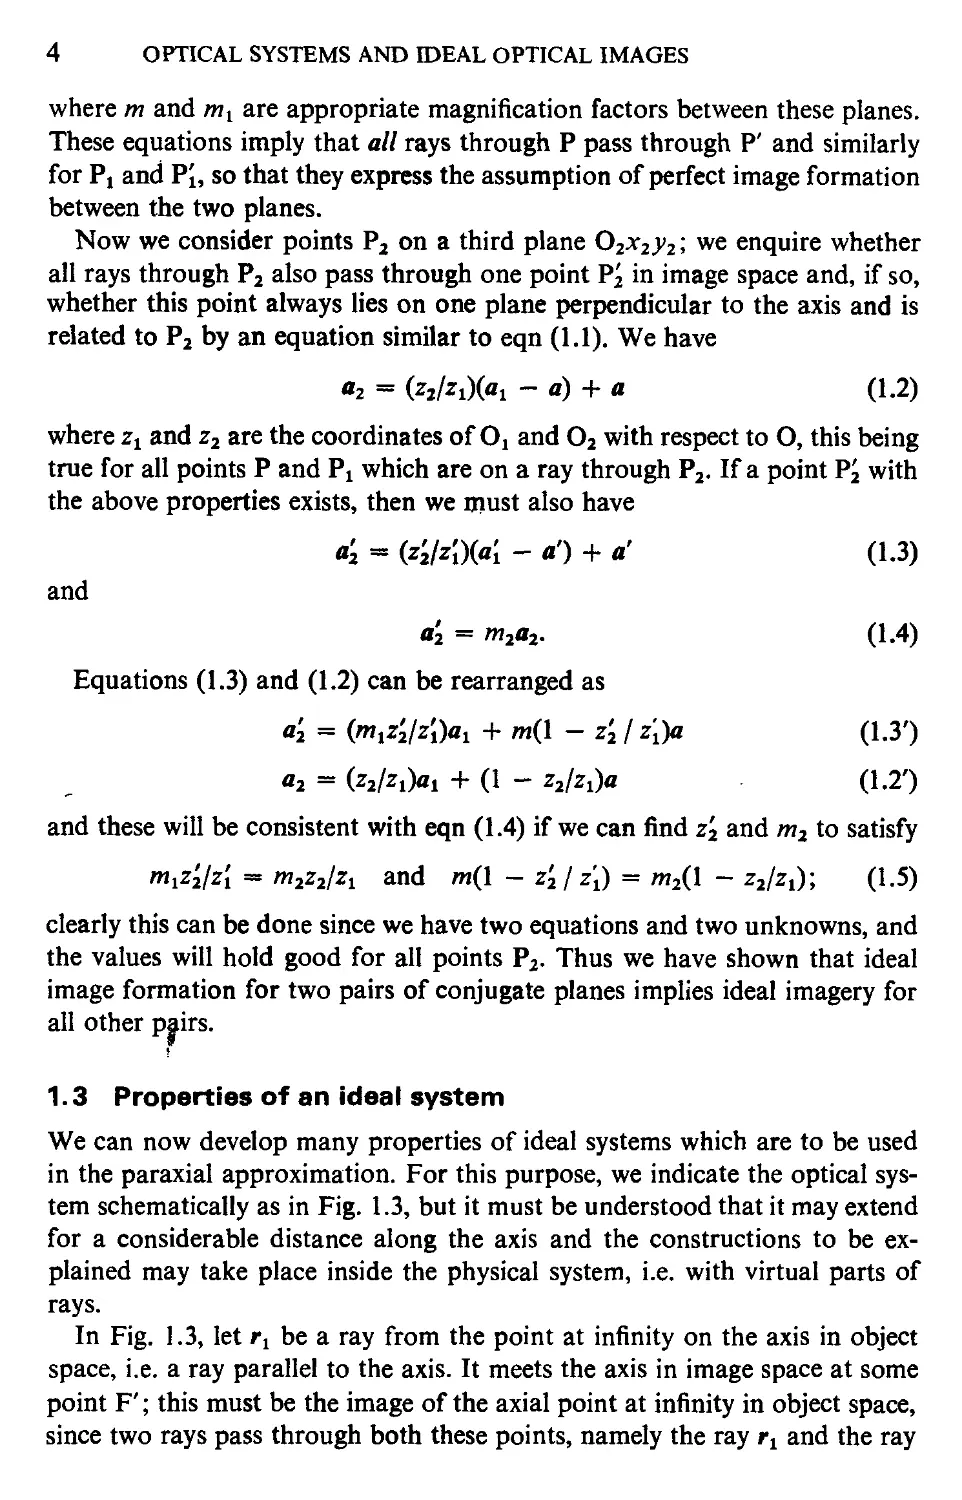 1.3 Properties of an ideal system